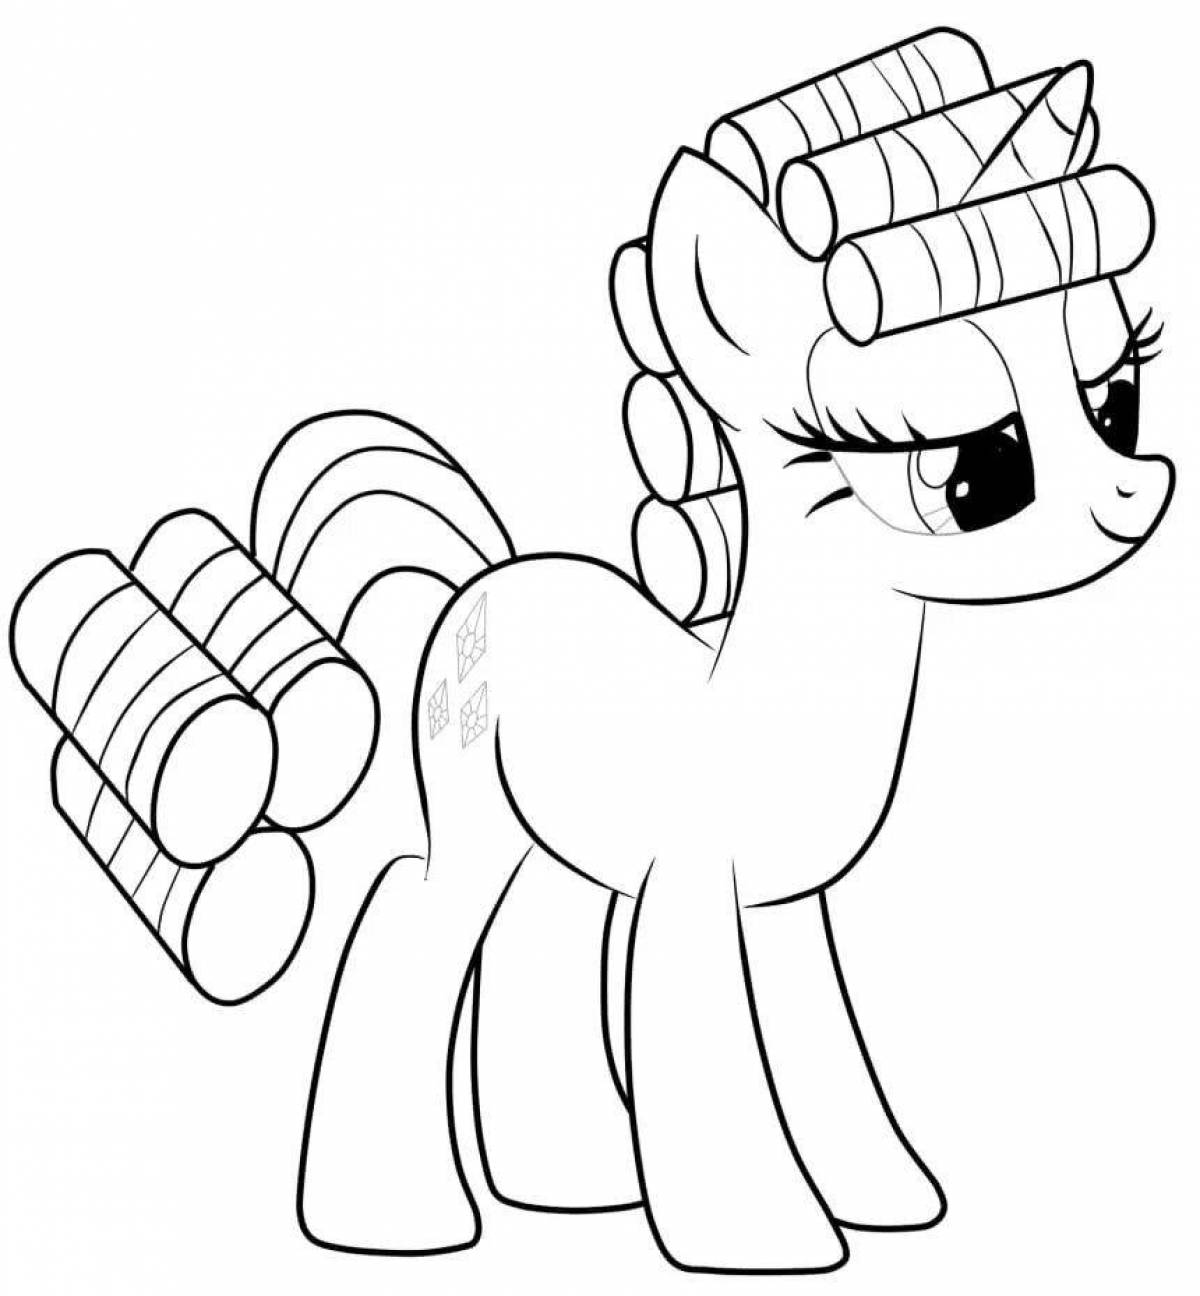 Tempting my little pony rarity coloring book